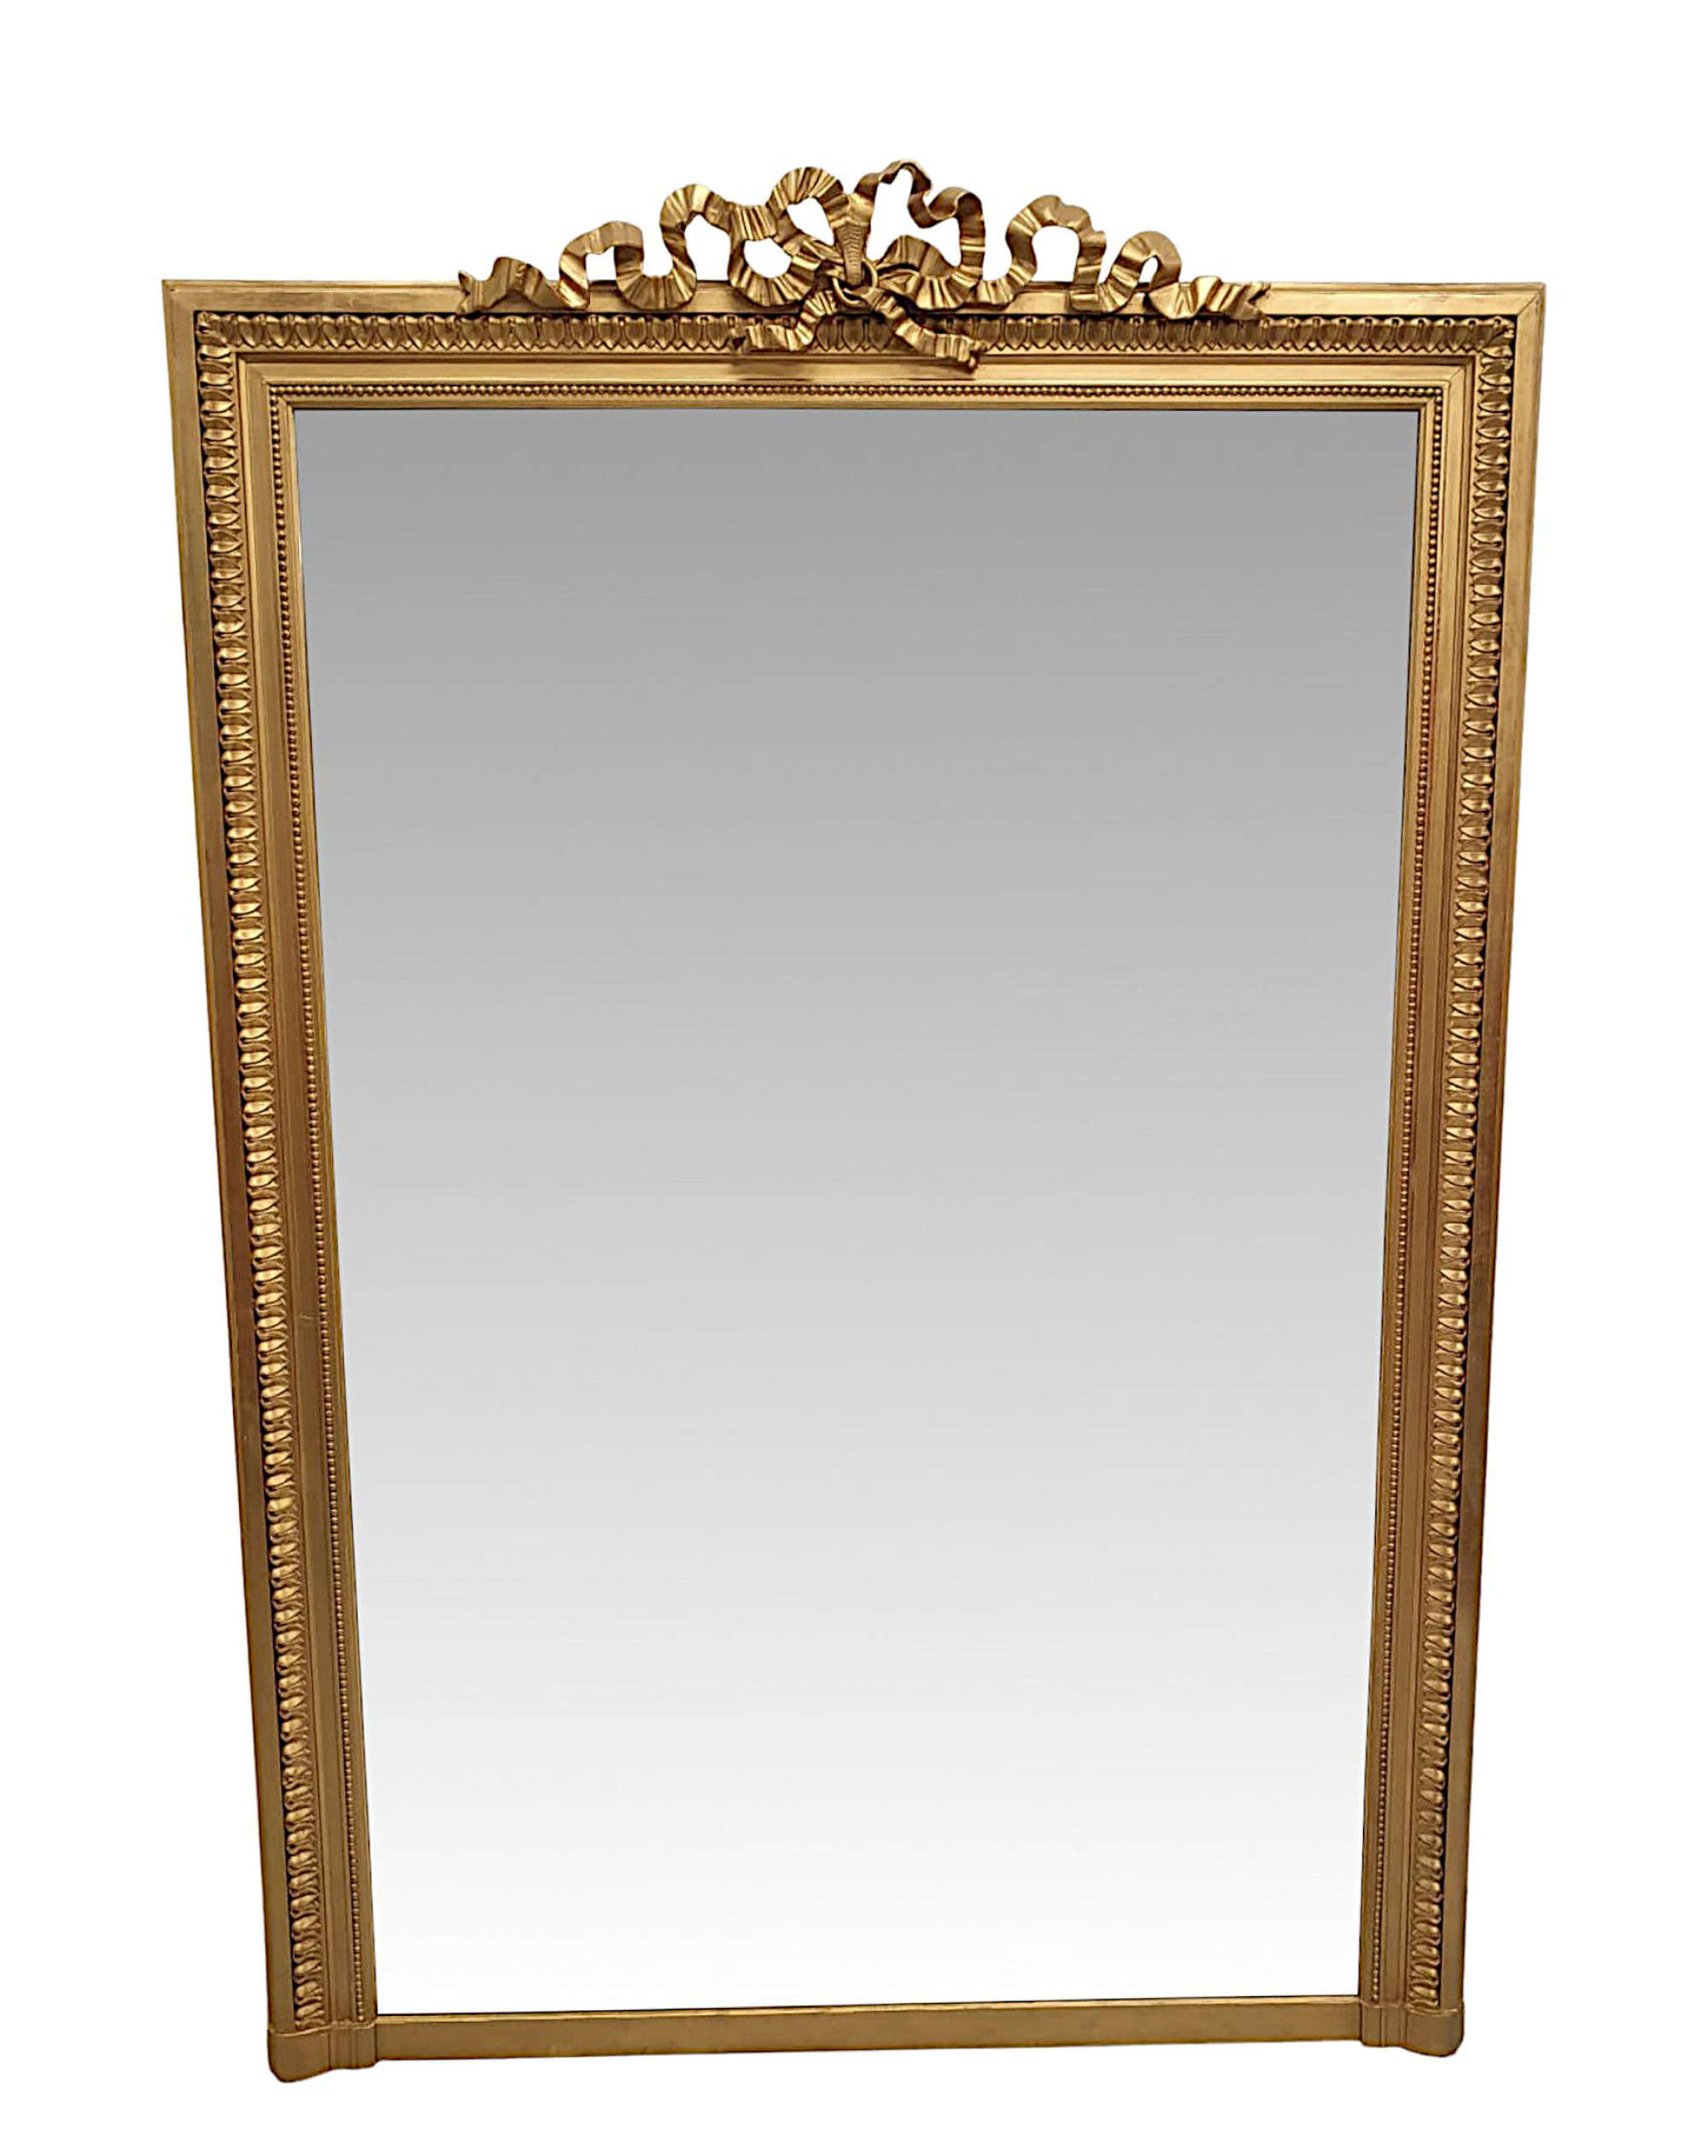 A Stunning 19th Century Giltwood Antique Overmantle Mirror With Ribbon Detail